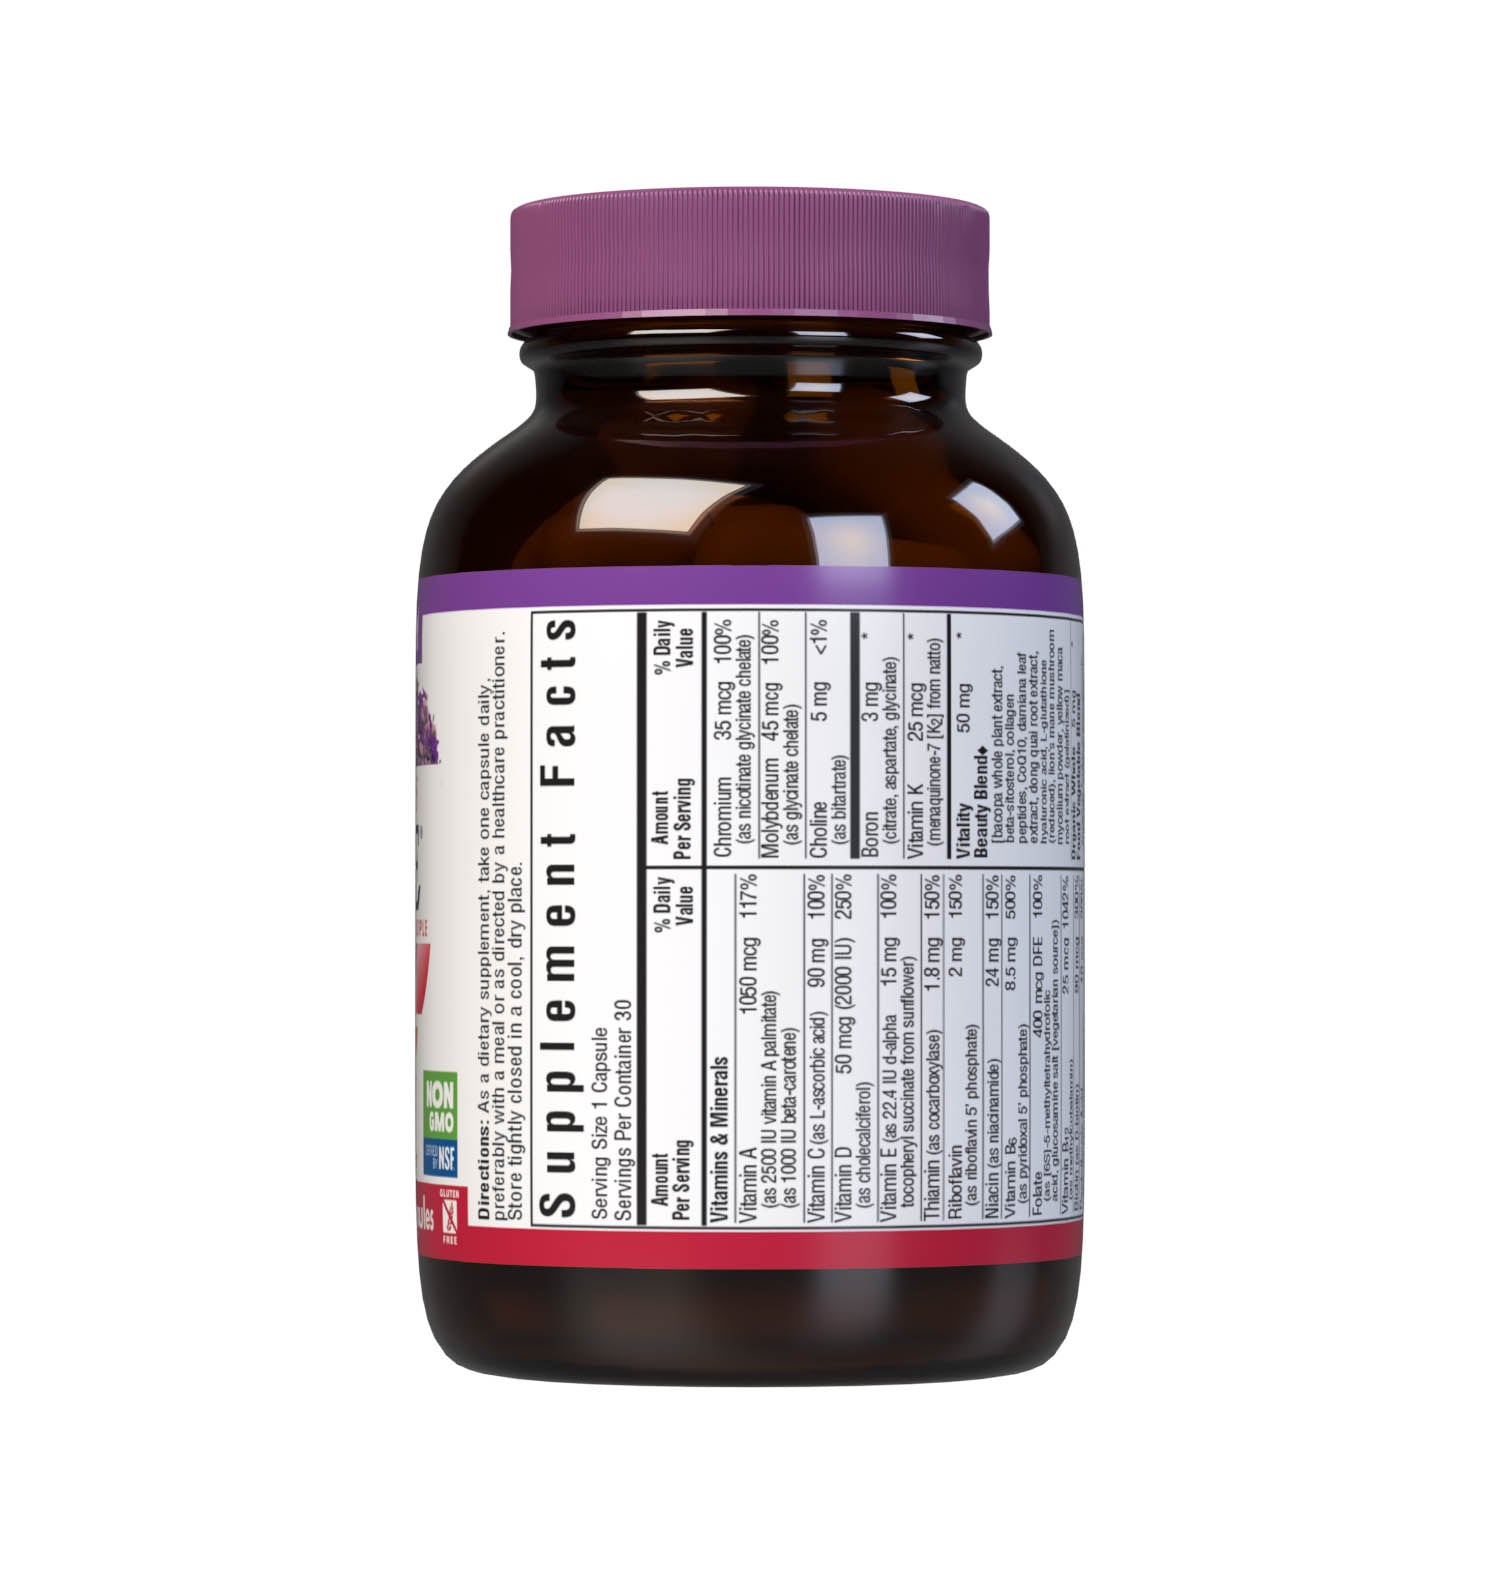 Bluebonnet’s Ladies’ ONE 40+ Whole Food-Based Multiple 30 Vegetable Capsules are formulated for daily nutritional support and vitality for women over 40. Helps to increase energy and vitality, protect beautiful skin, enhance mood, and support heart health. Supplement facts panel 1. #size_30 count